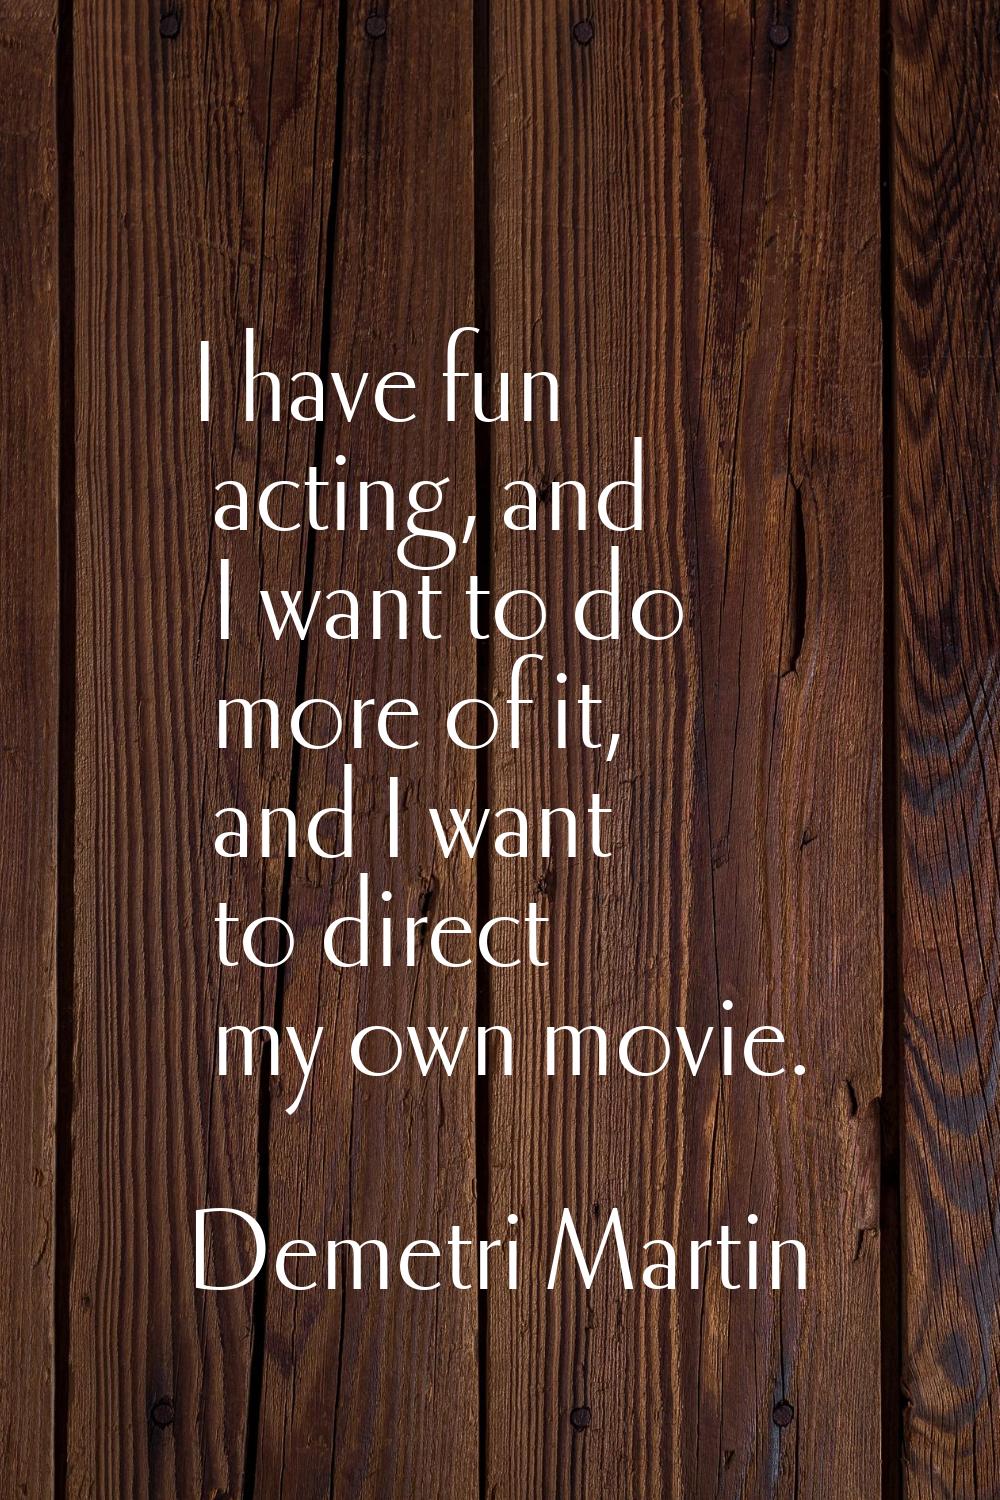 I have fun acting, and I want to do more of it, and I want to direct my own movie.